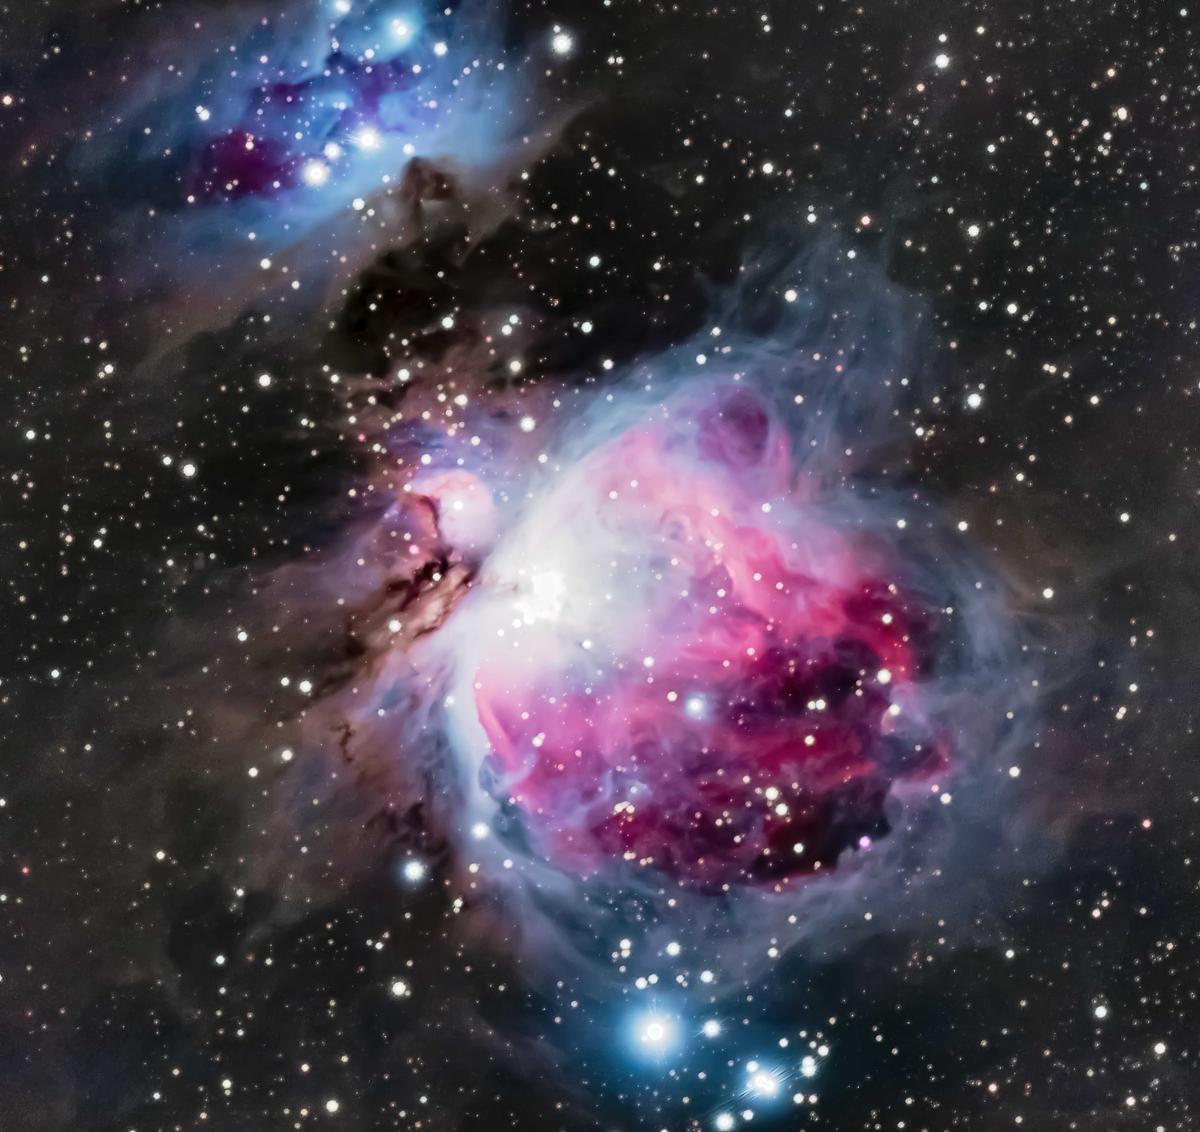 The Orion Nebula is a diffuse nebula situated in the Milky Way, being south of Orion's Belt in the constellation of Orion. It is one of the brightest nebulas and is visible to the naked eye in the night sky. (SWNS)